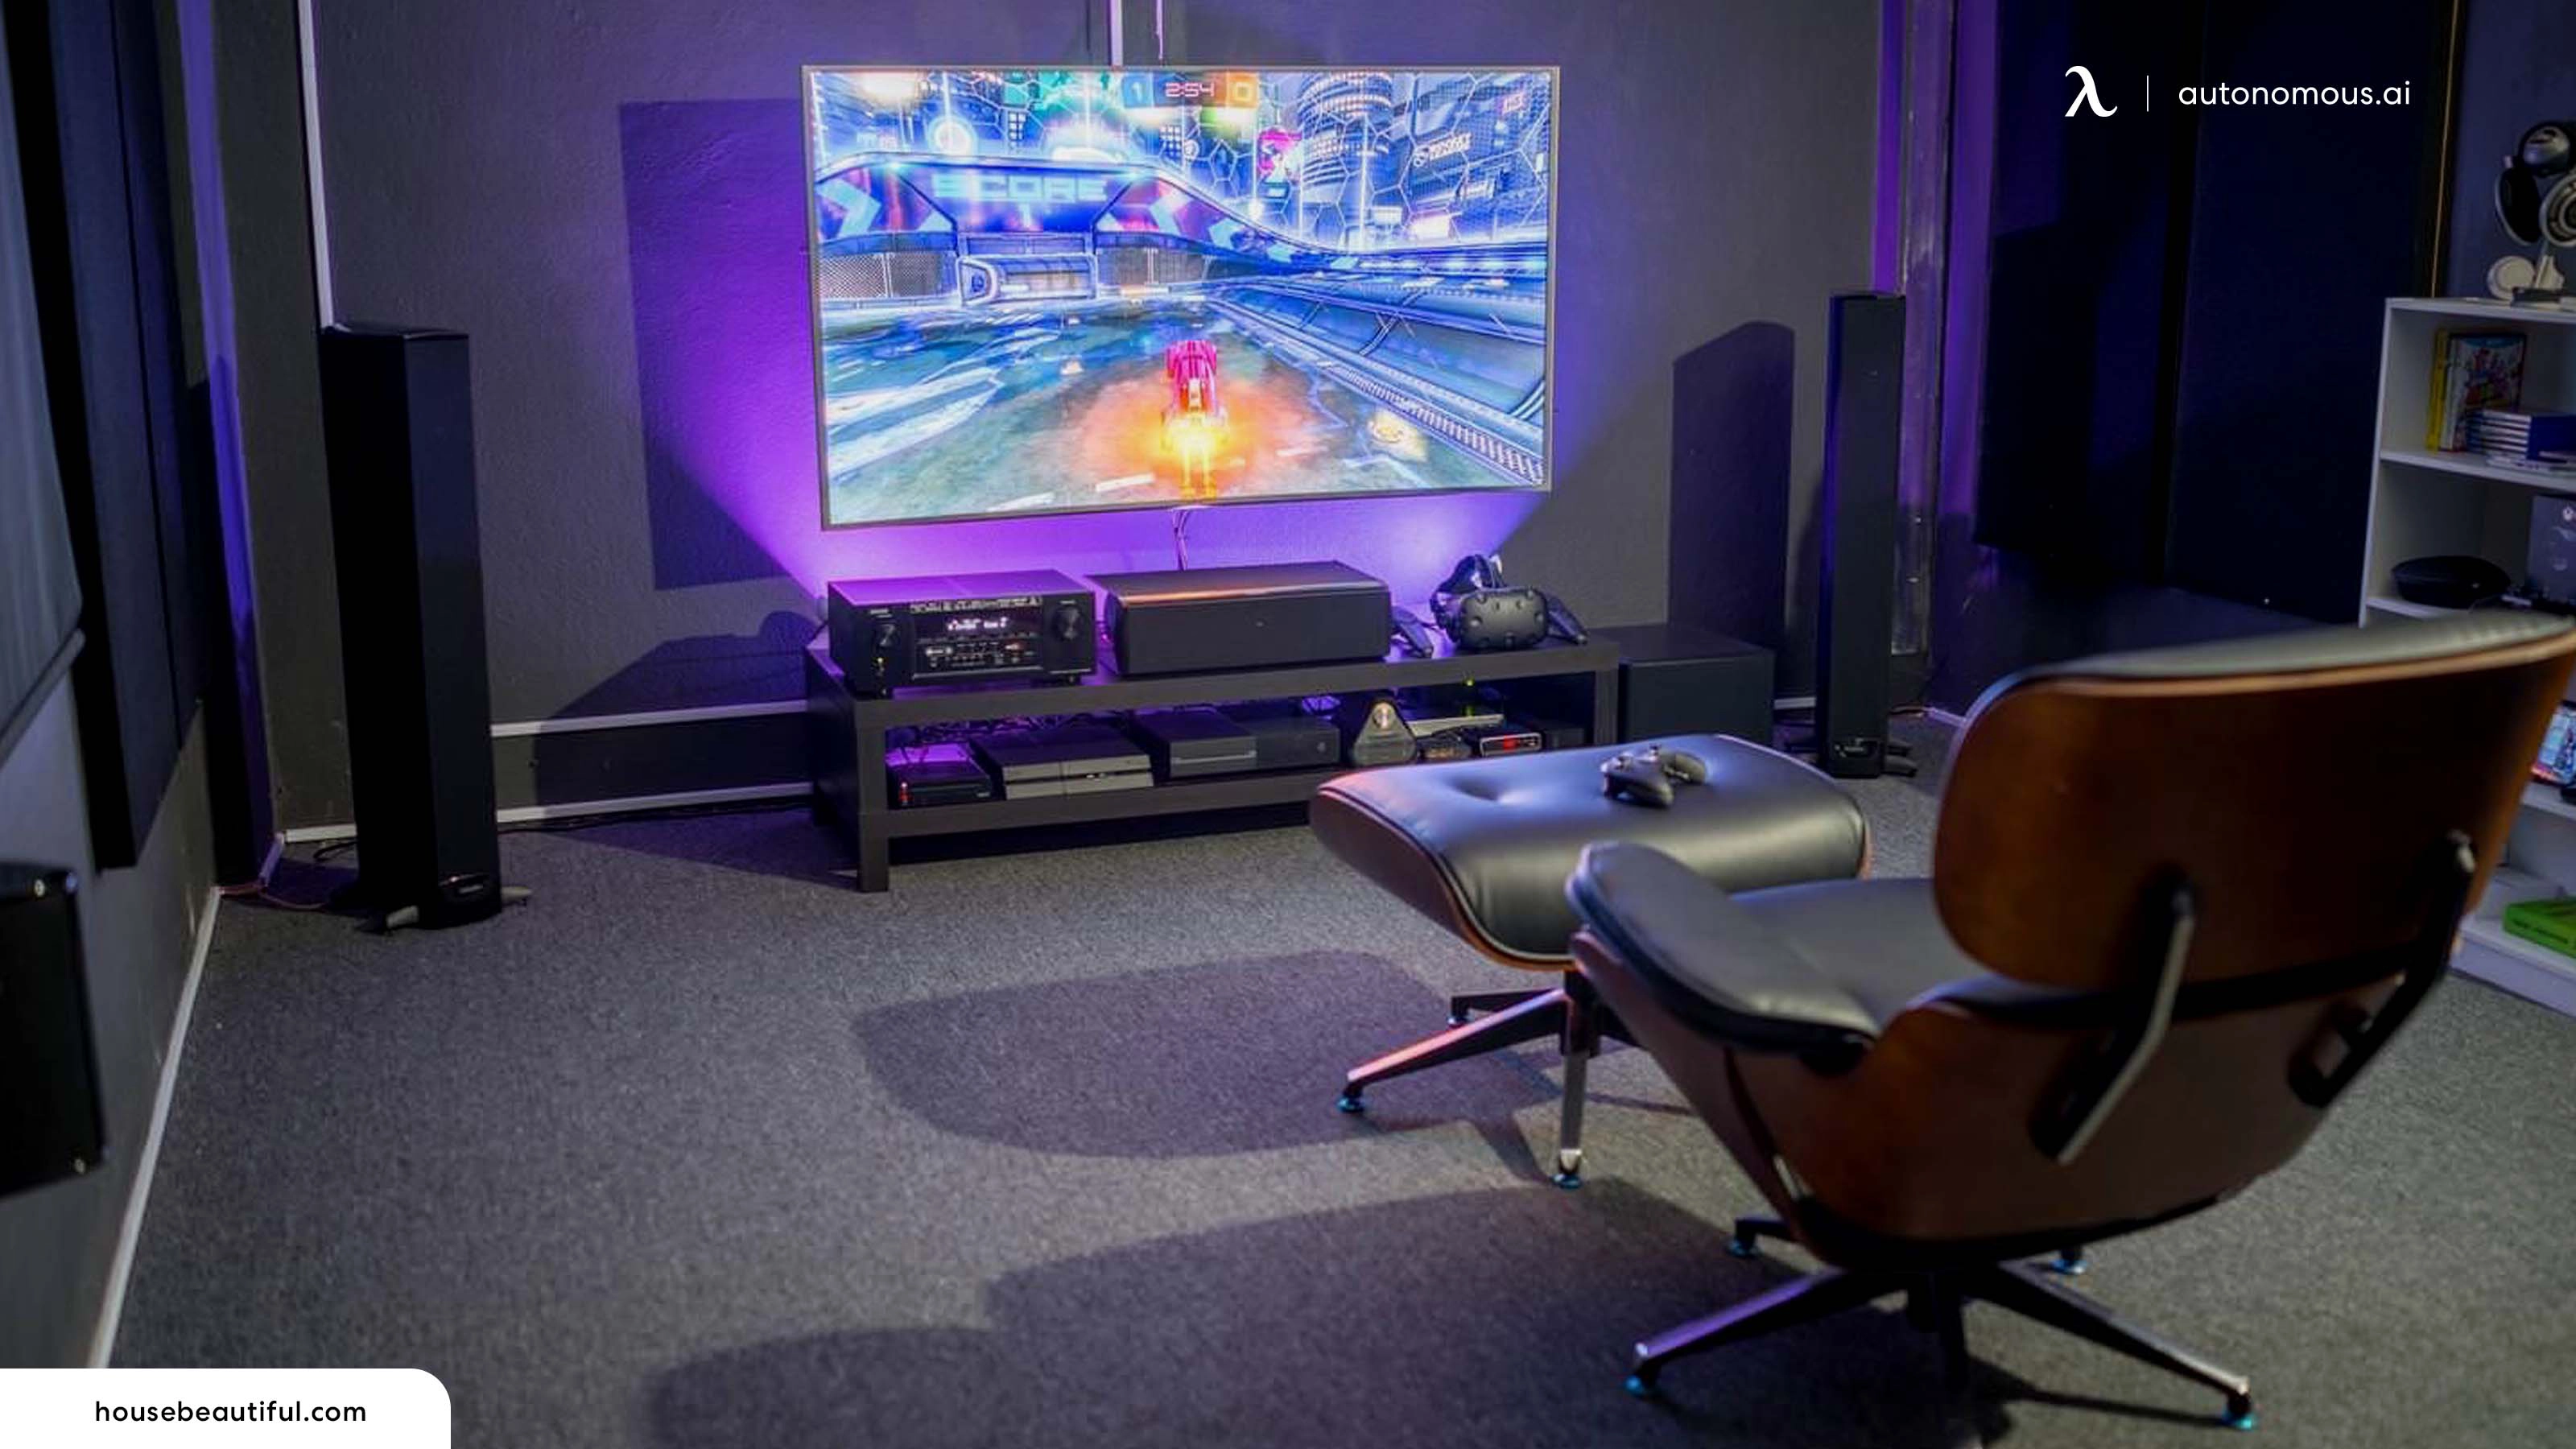 How to Build the Best VR Gaming Setup for Your Room?